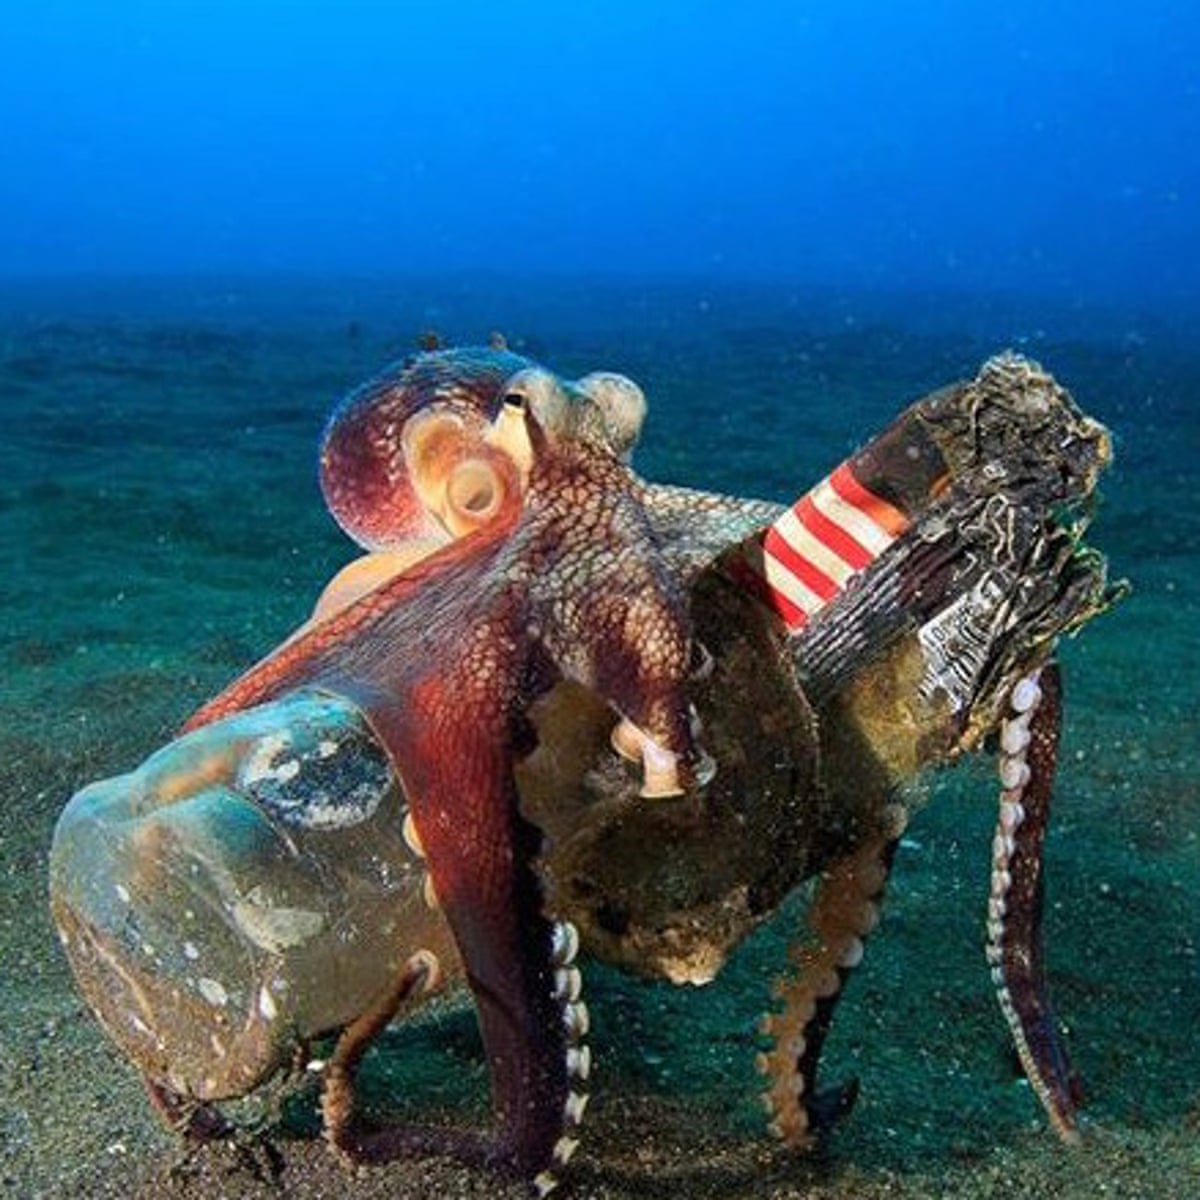 Bottles, cans, batteries: octopuses found using litter on seabed | Marine  life | The Guardian